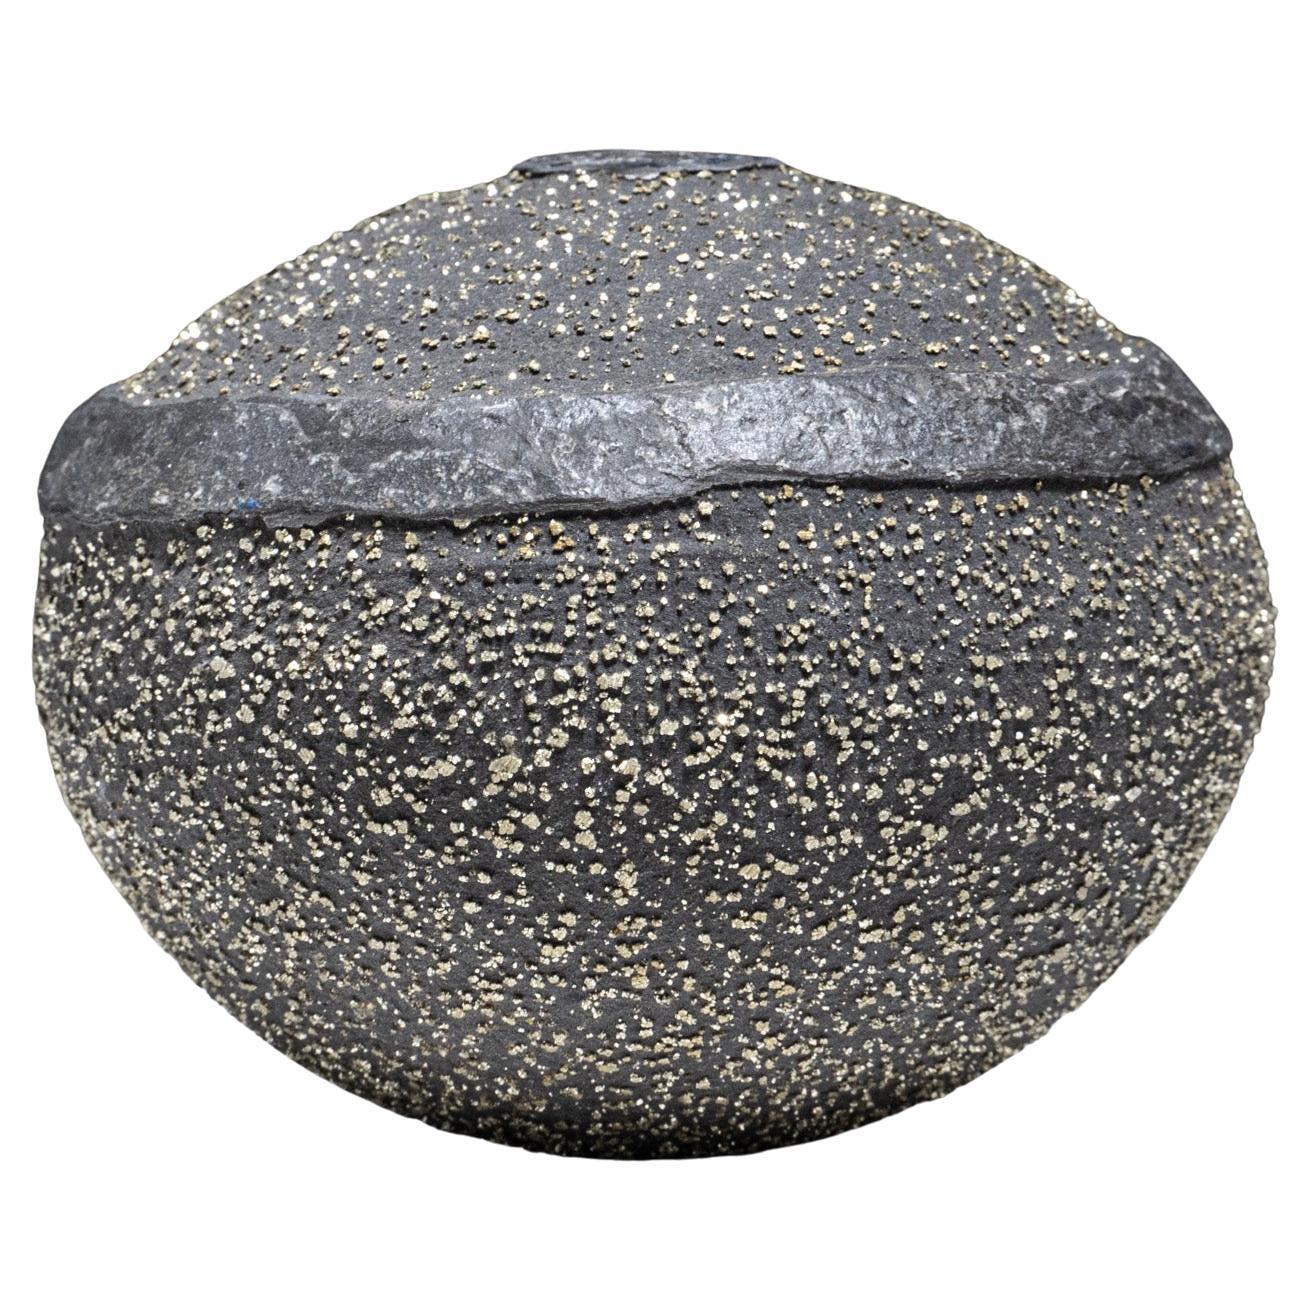 Pyrite Concretion (Boji Stone)From Dongchuan District, Kunming Prefecture, China